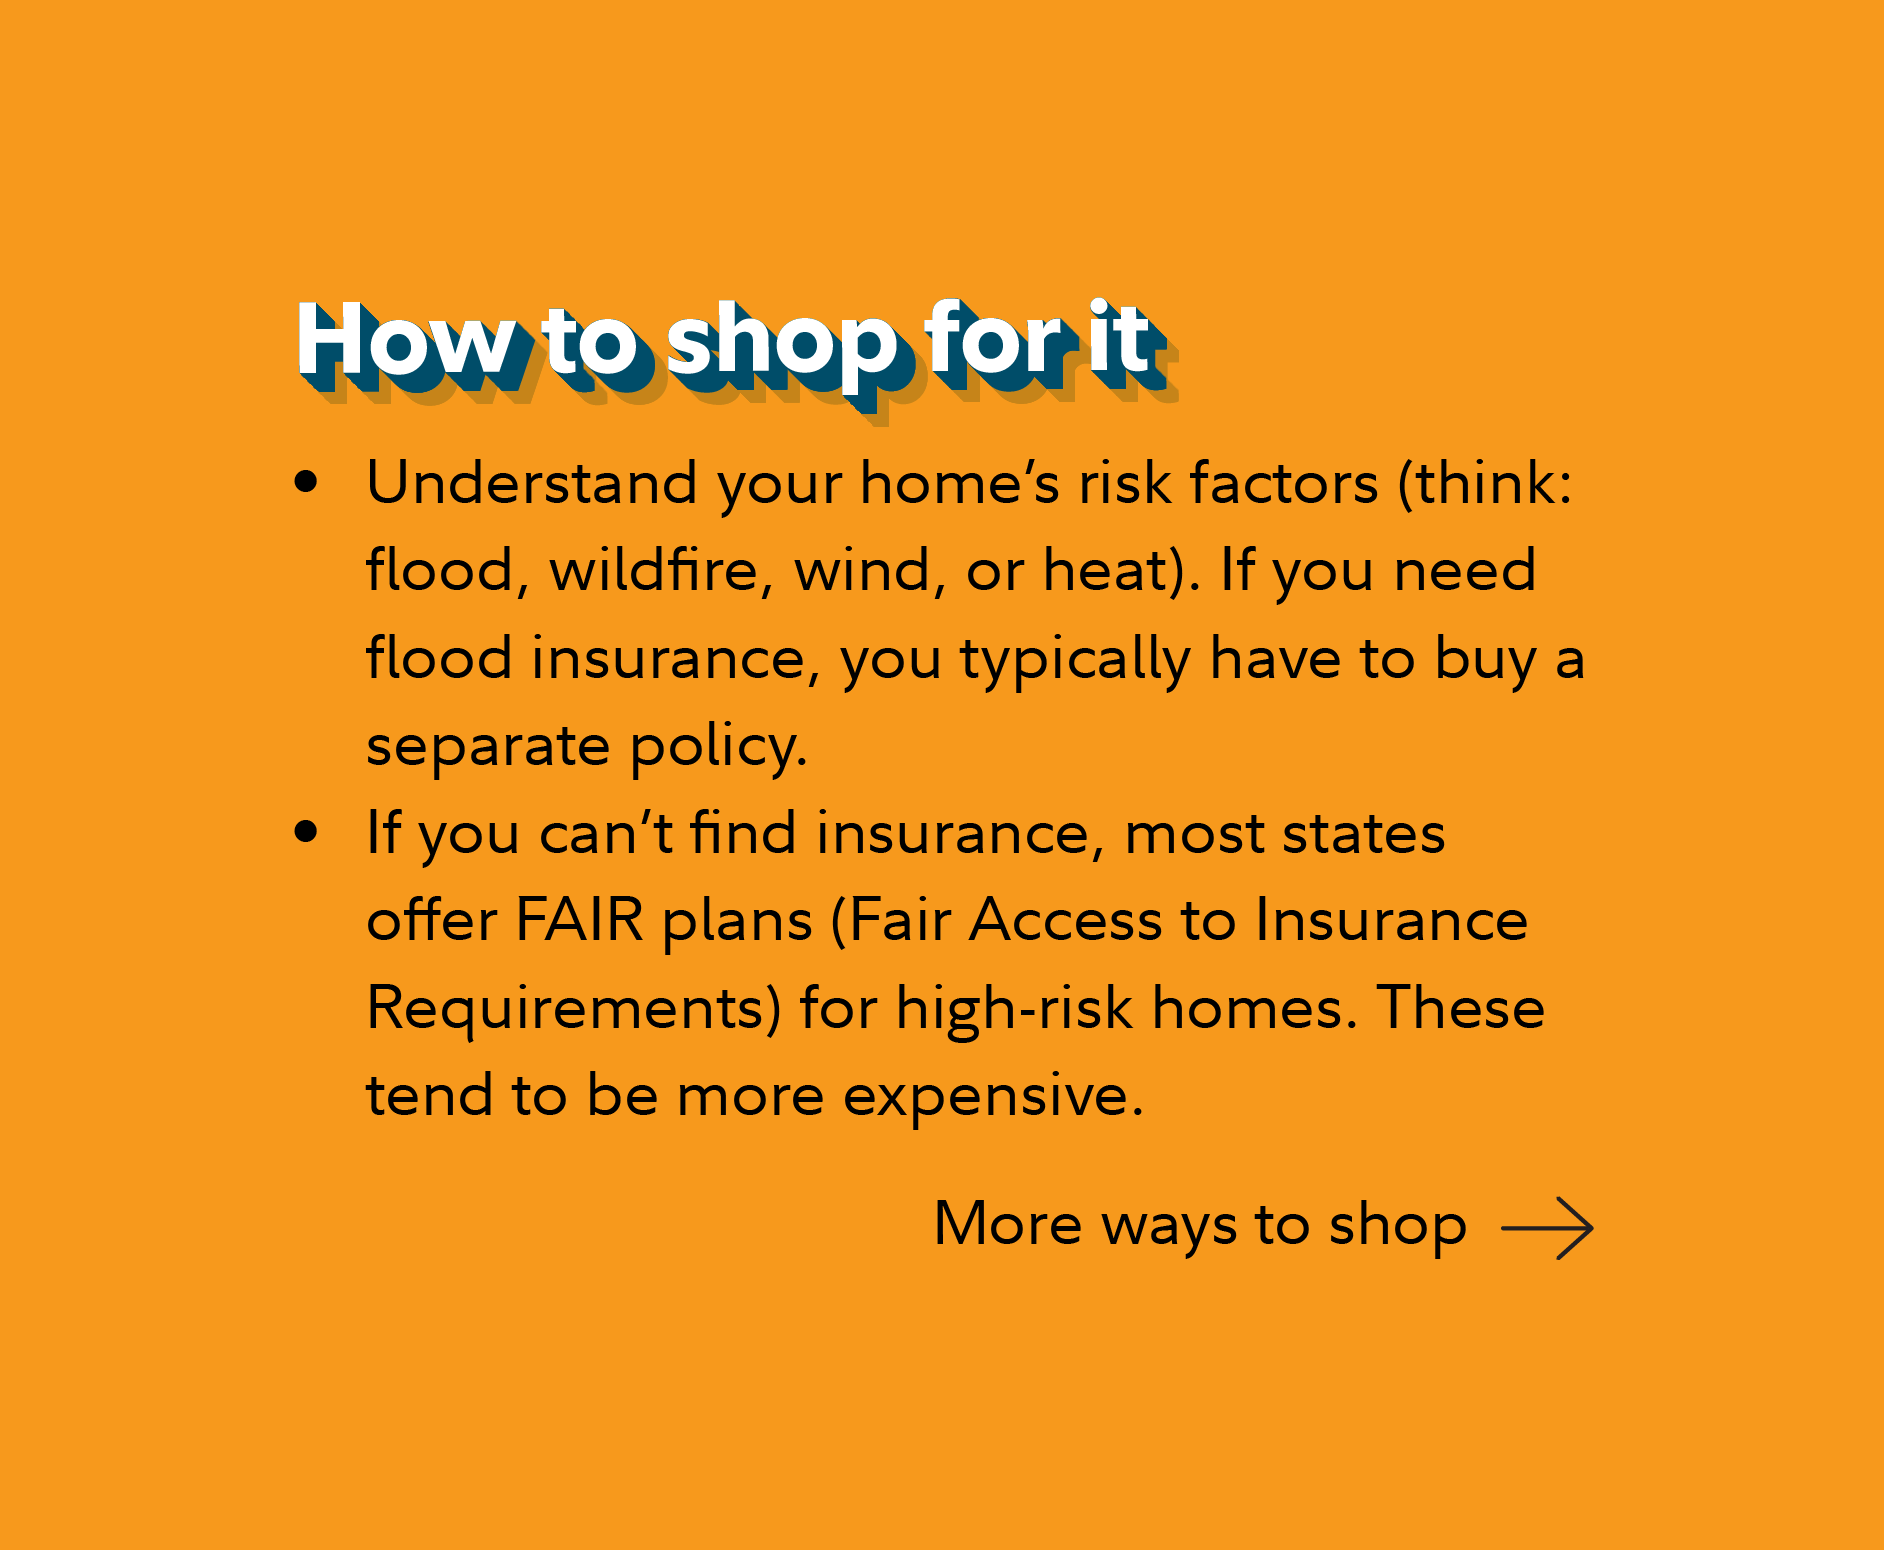 How to shop for it Understand your home’s risk factors (think: flood, wildfire, wind, or heat). If you need flood insurance, you typically have to buy a separate policy. If you can’t find insurance, most states offer FAIR plans (Fair Access to Insurance Requirements) for high-risk homes. These tend to be more expensive. Continue for more ways to shop.